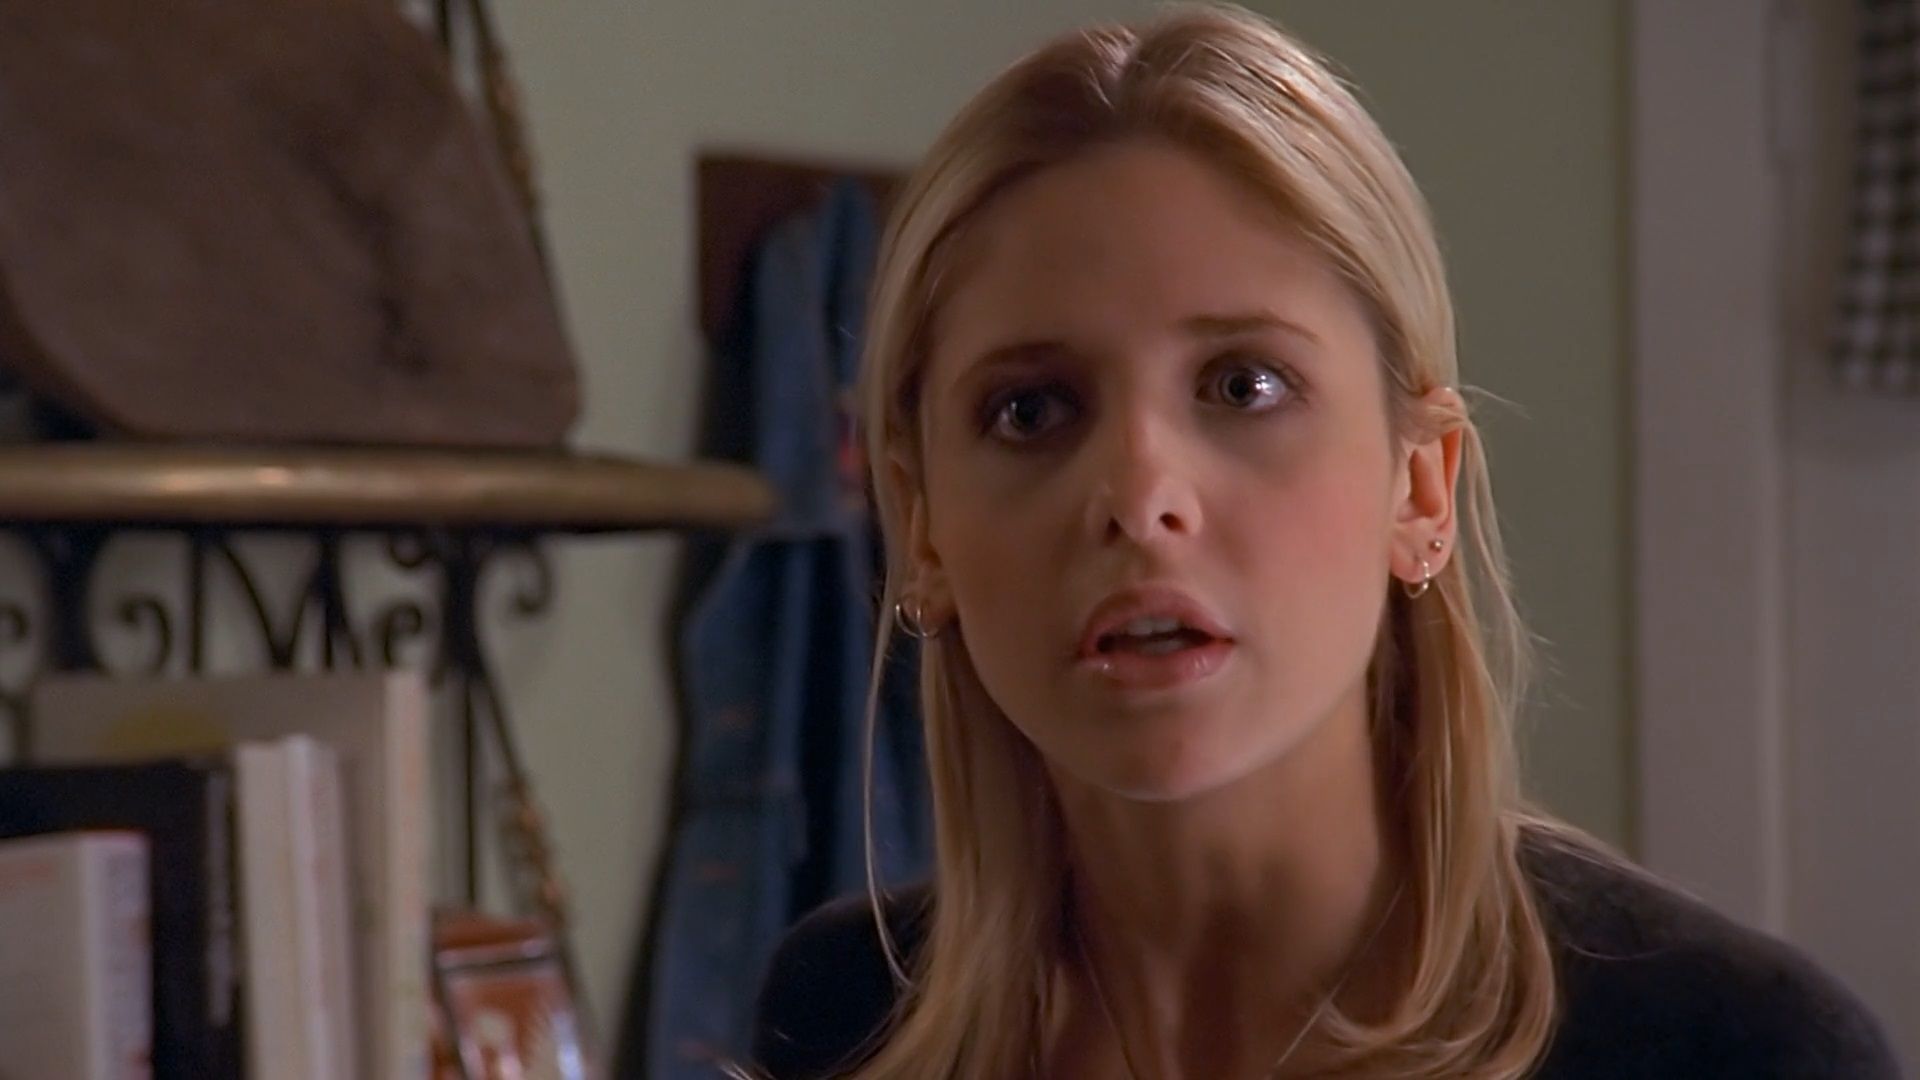 Buffy in the episode "Becoming, Part 2".